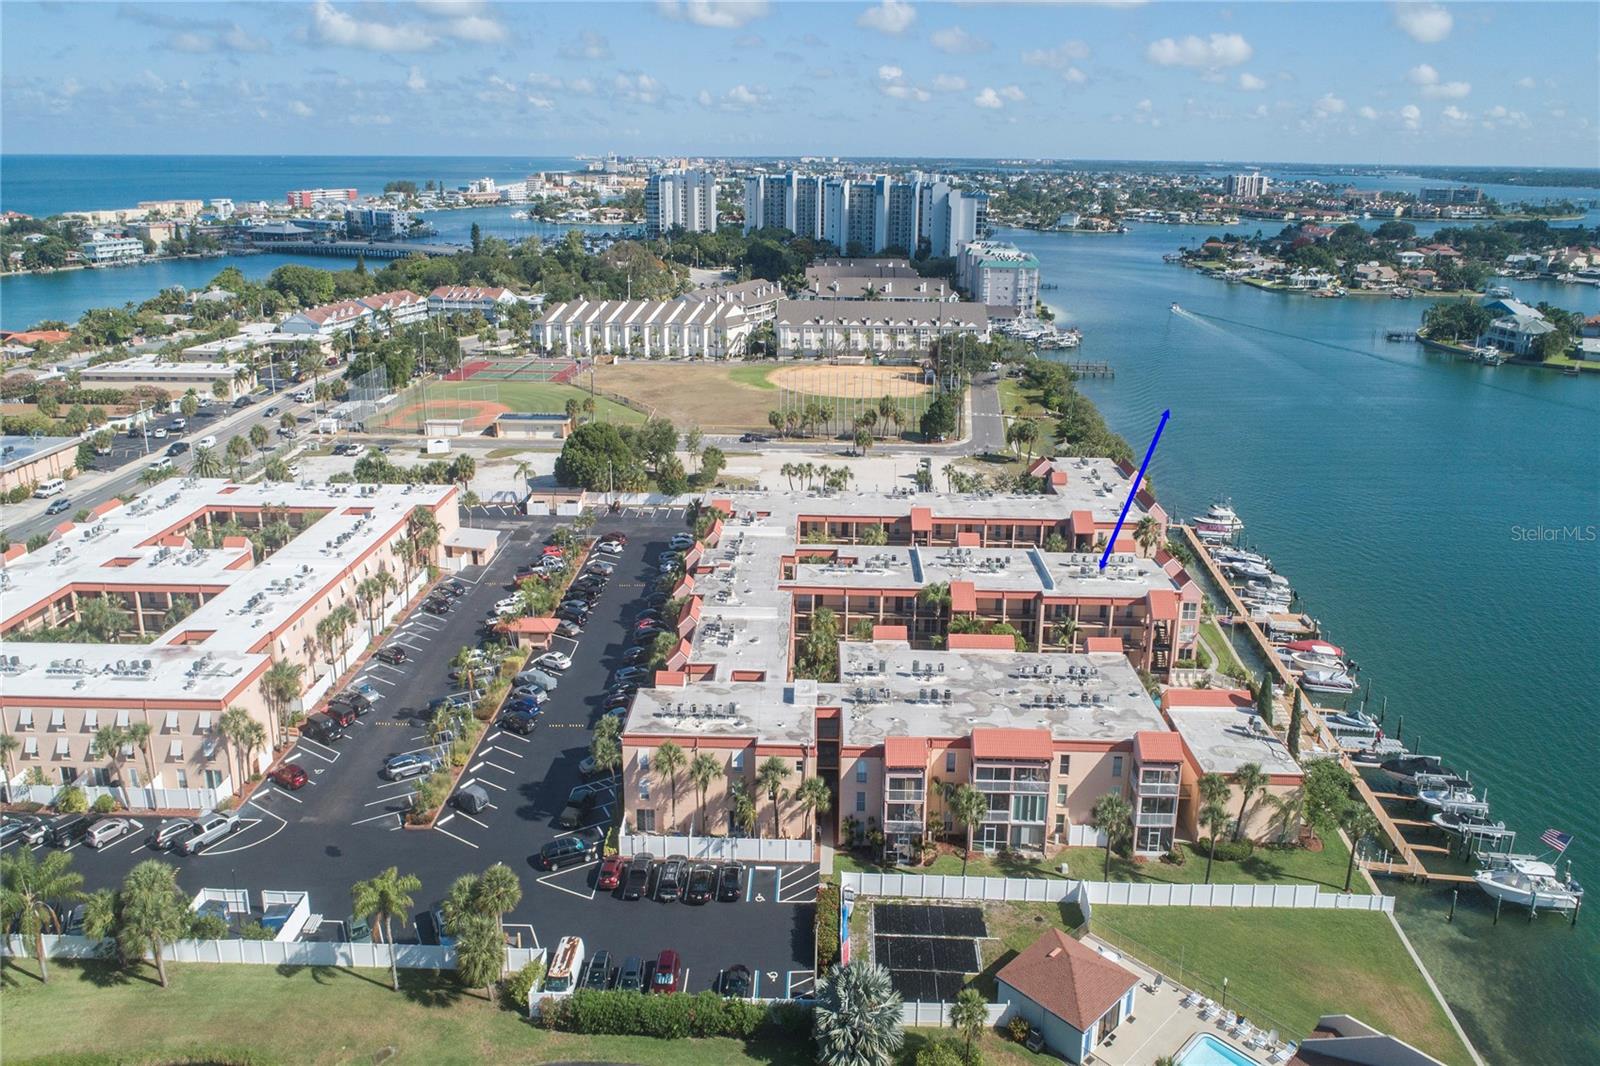 Aerial view of Boca Shores waterfront community.